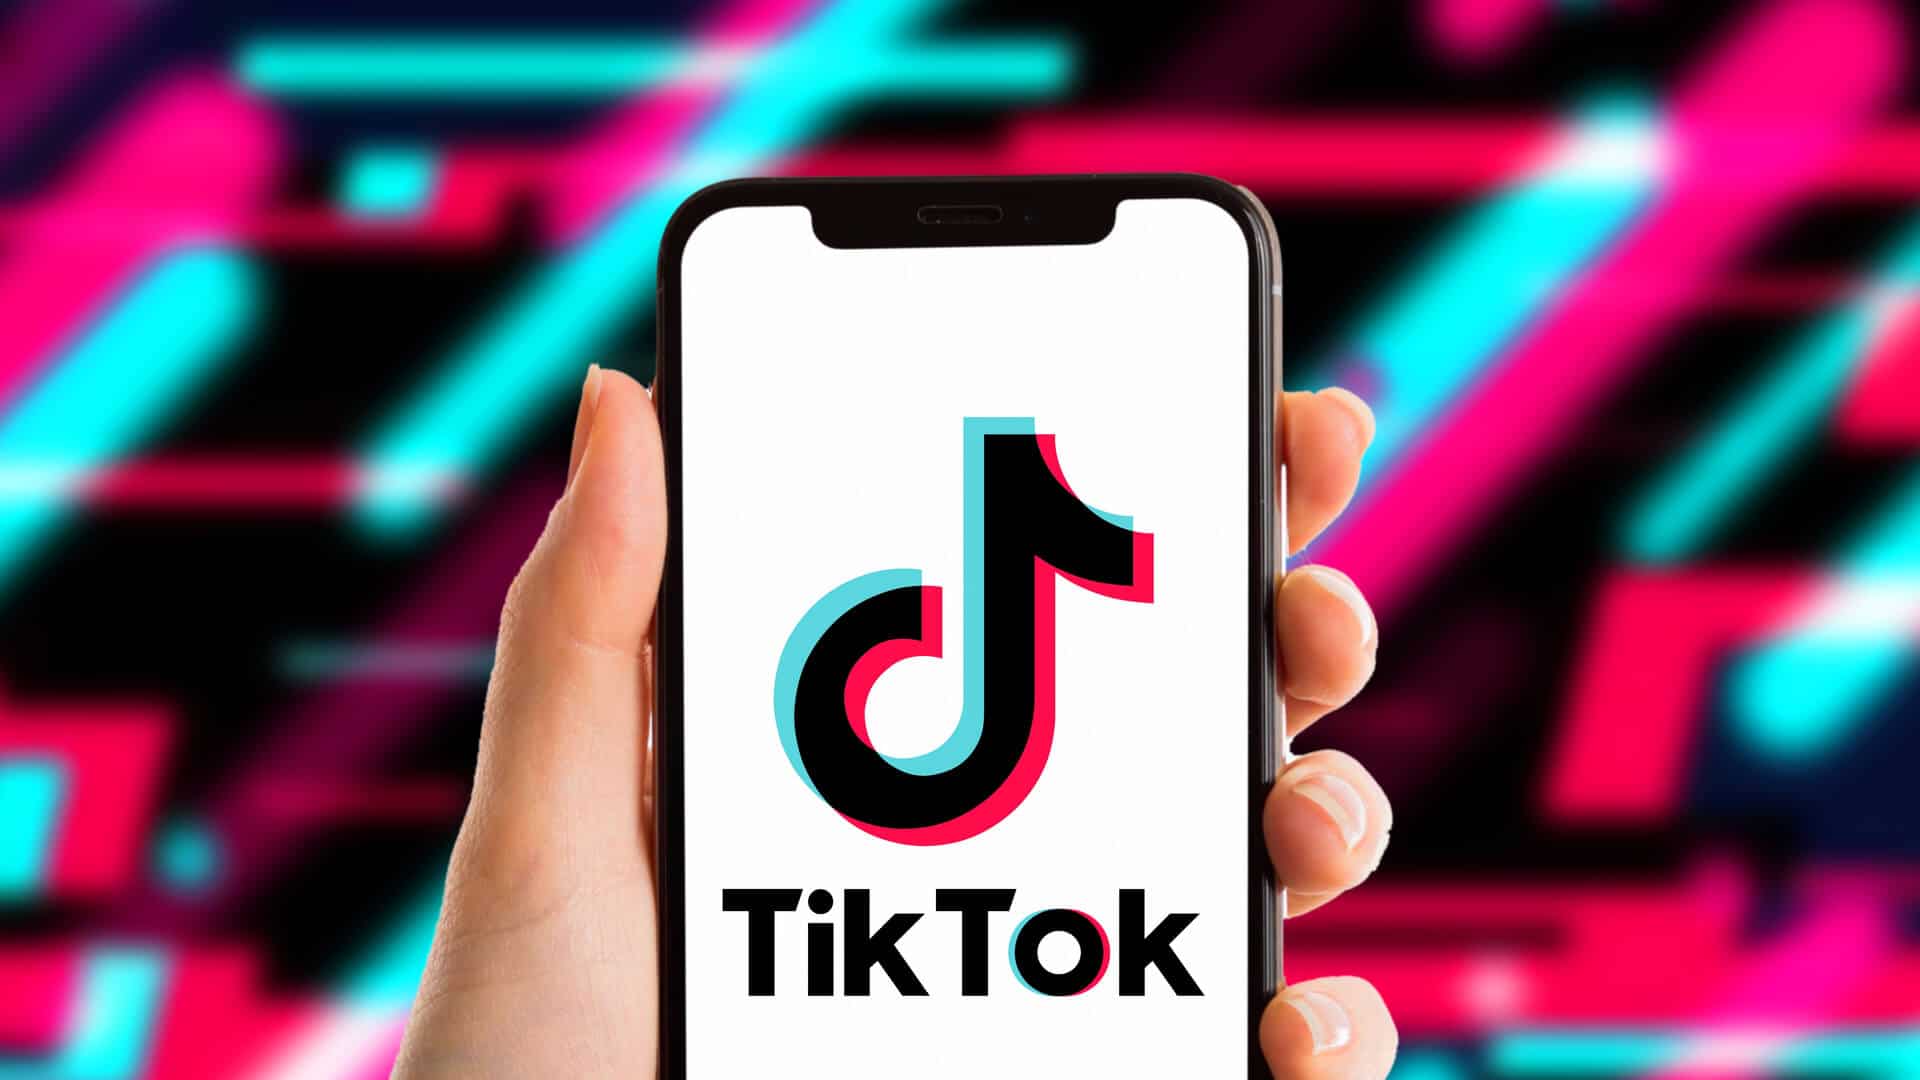 TikTok videos can now be 10 minutes